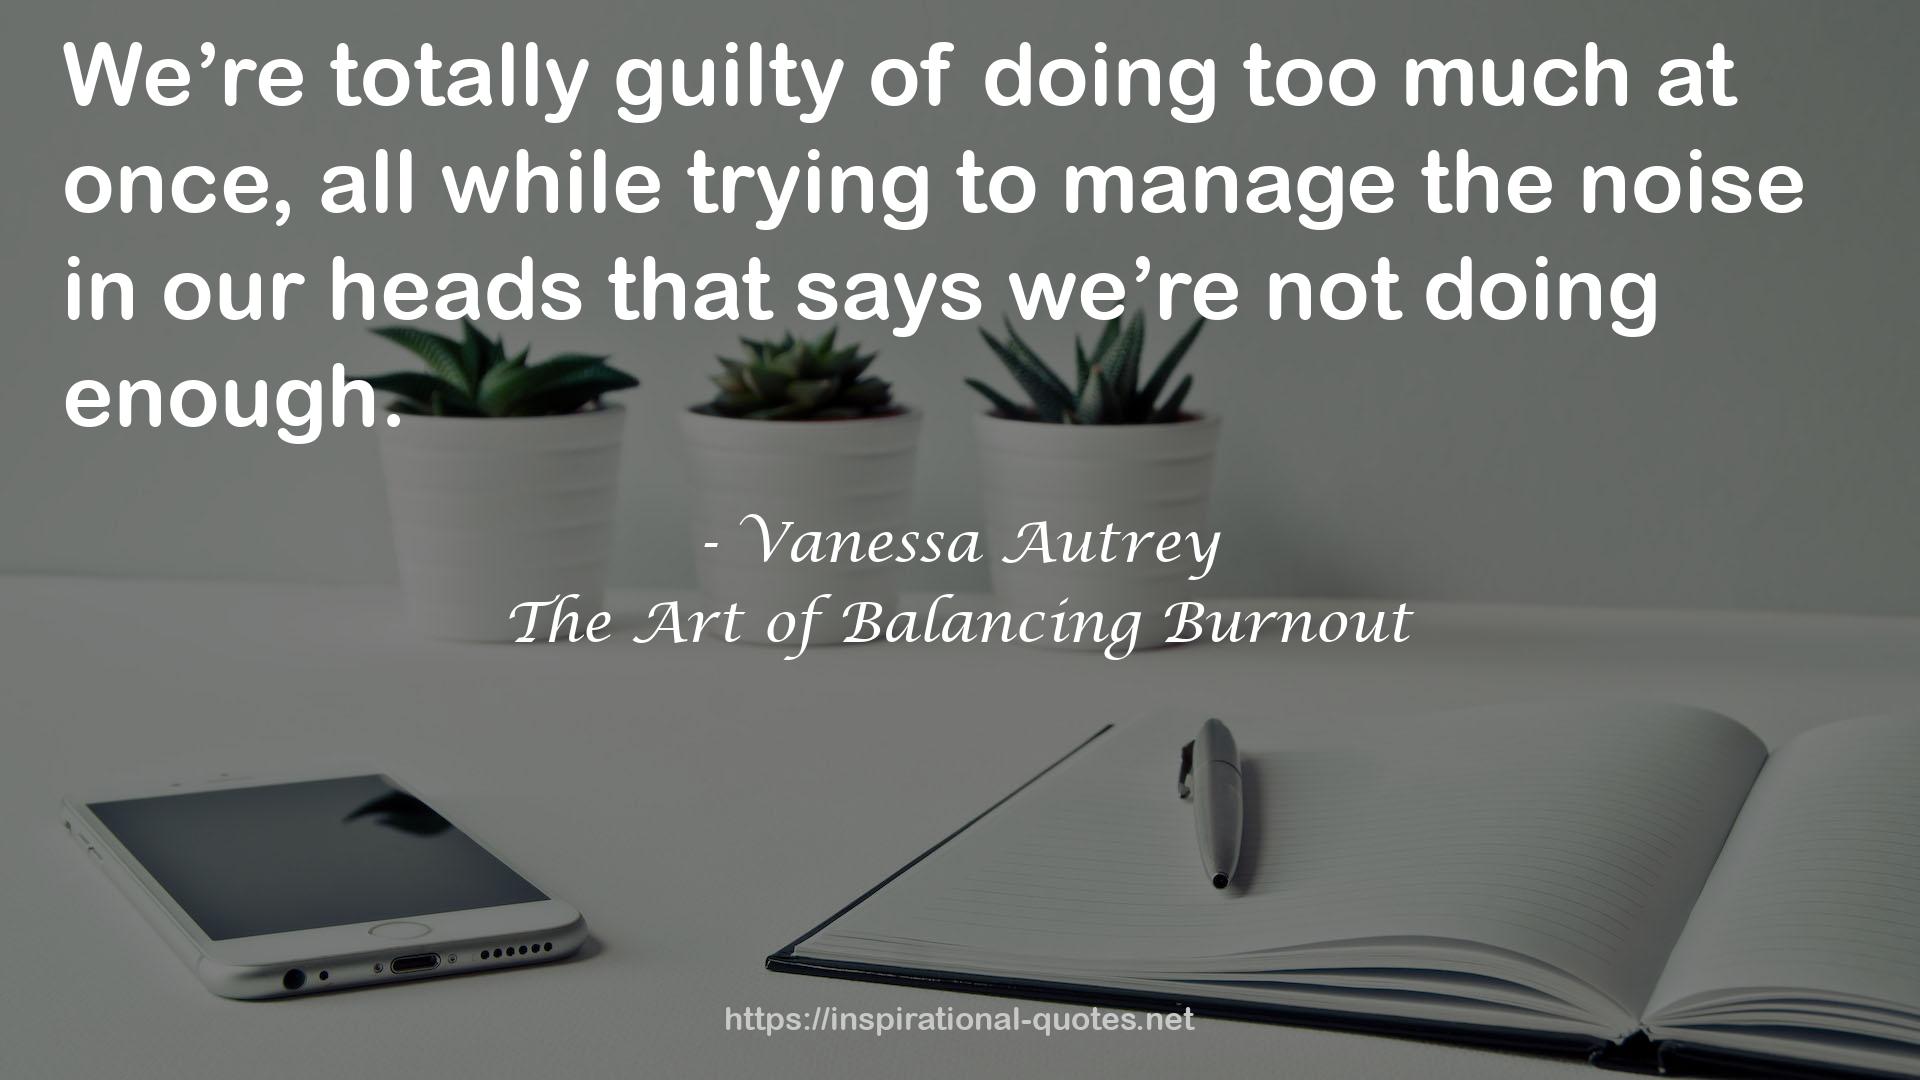 The Art of Balancing Burnout QUOTES